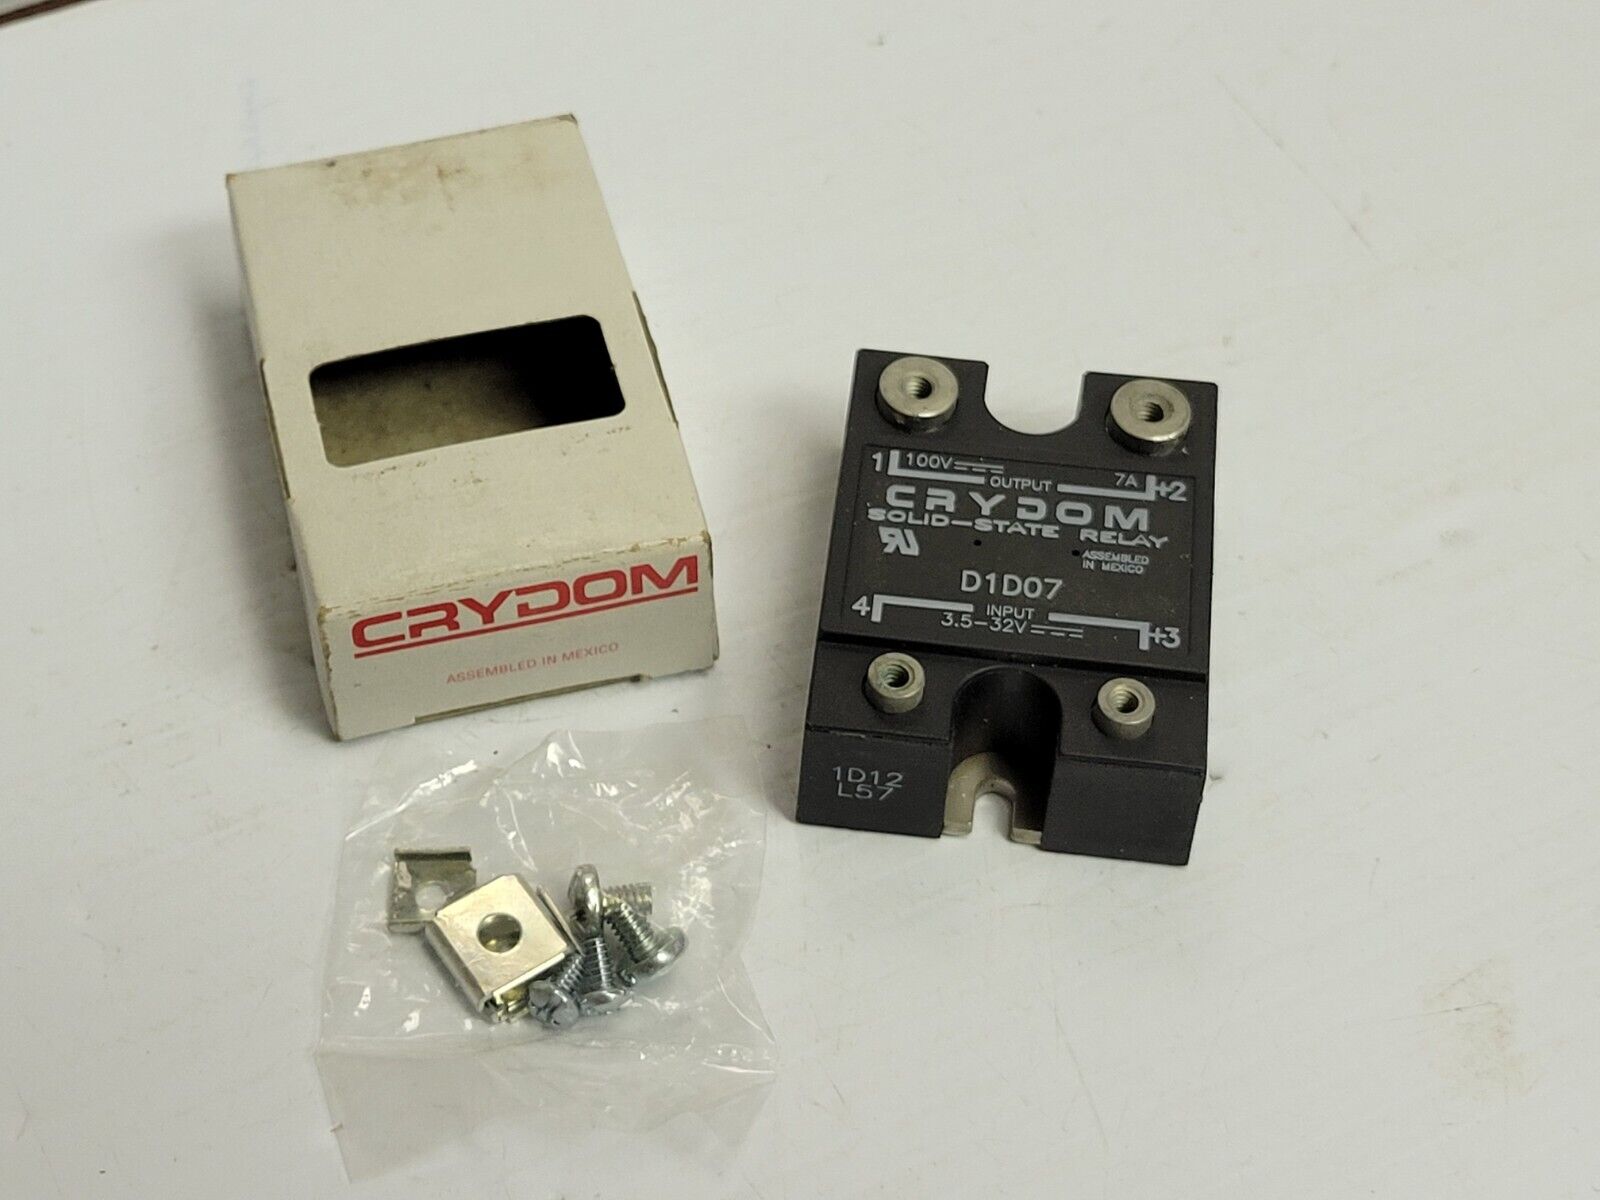 New Crydom Solid State Relay D1d07